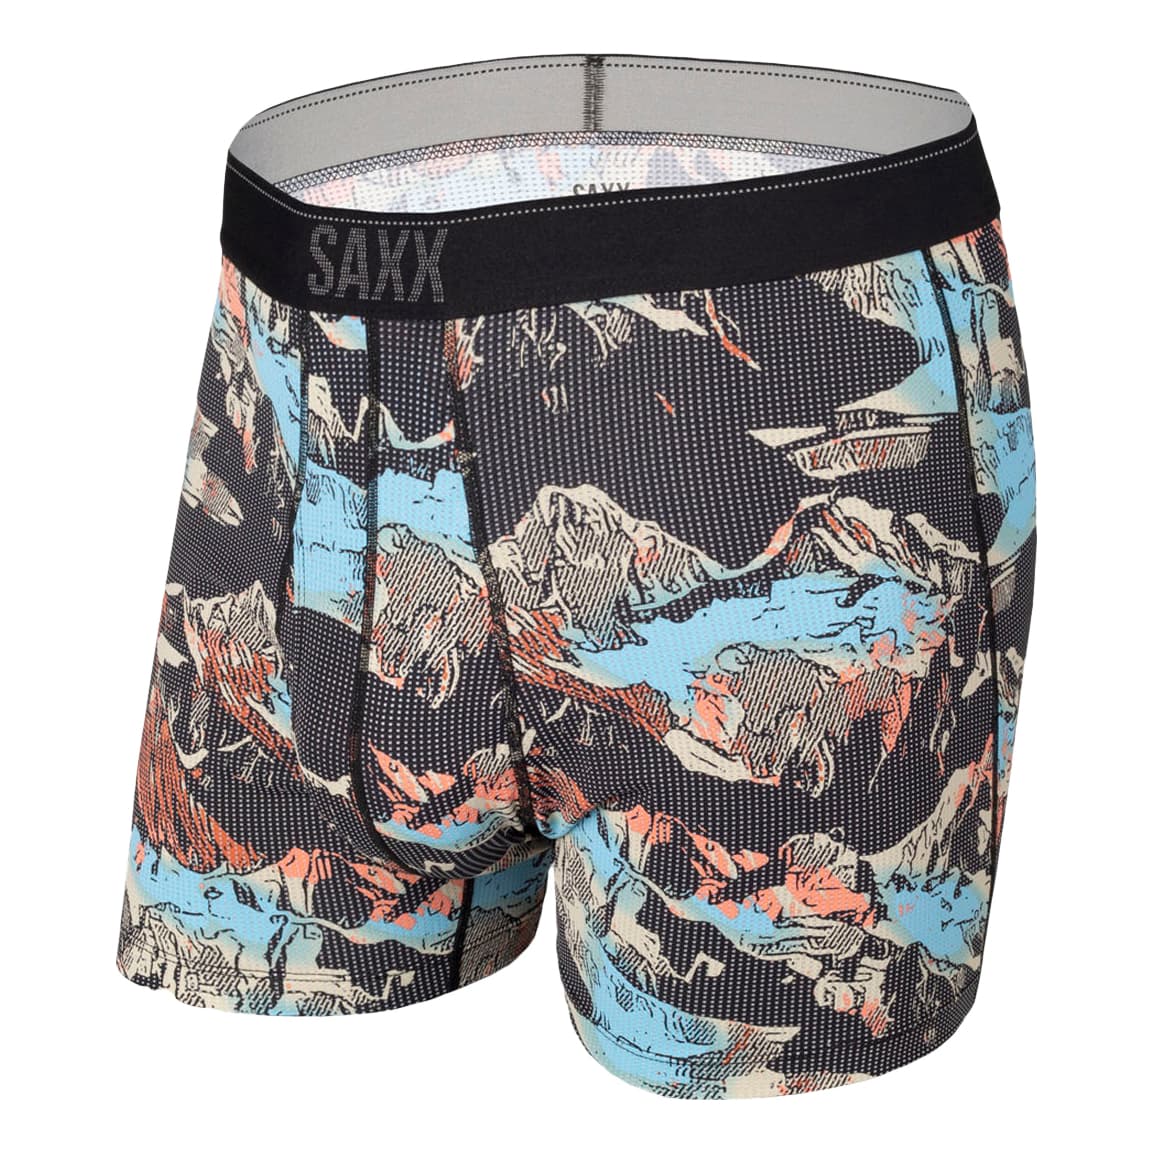 Saxx® Men’s Quest Boxer Brief with Fly - Black Mountainscape